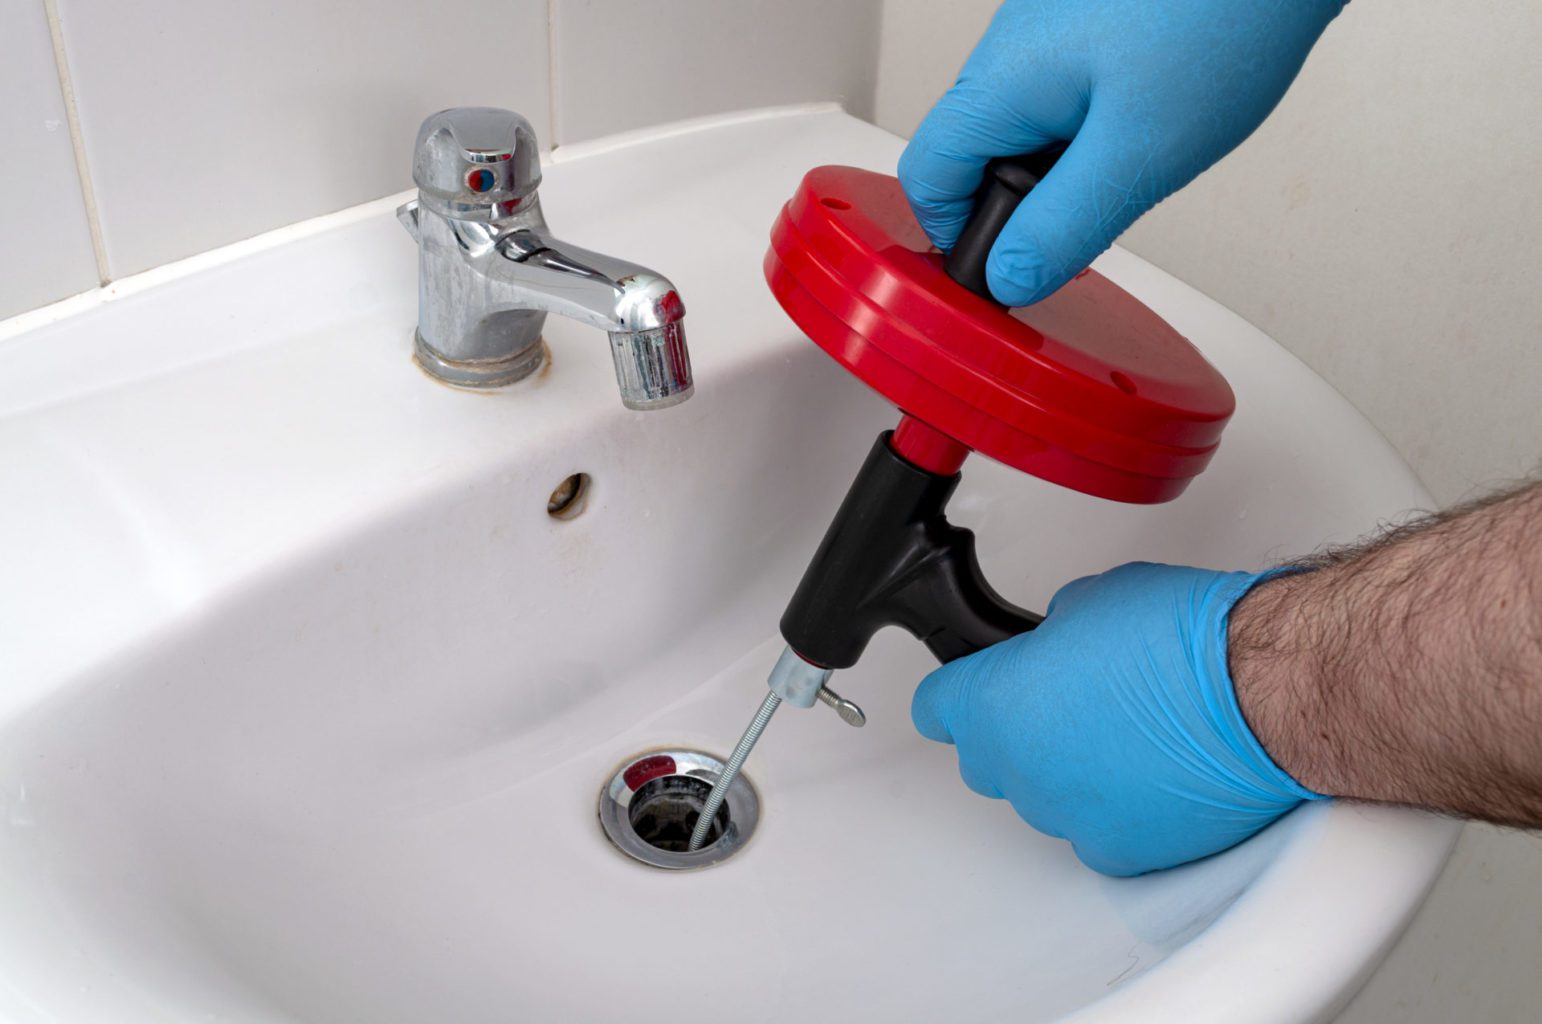 Use a plumber's snake to unclog the sink.